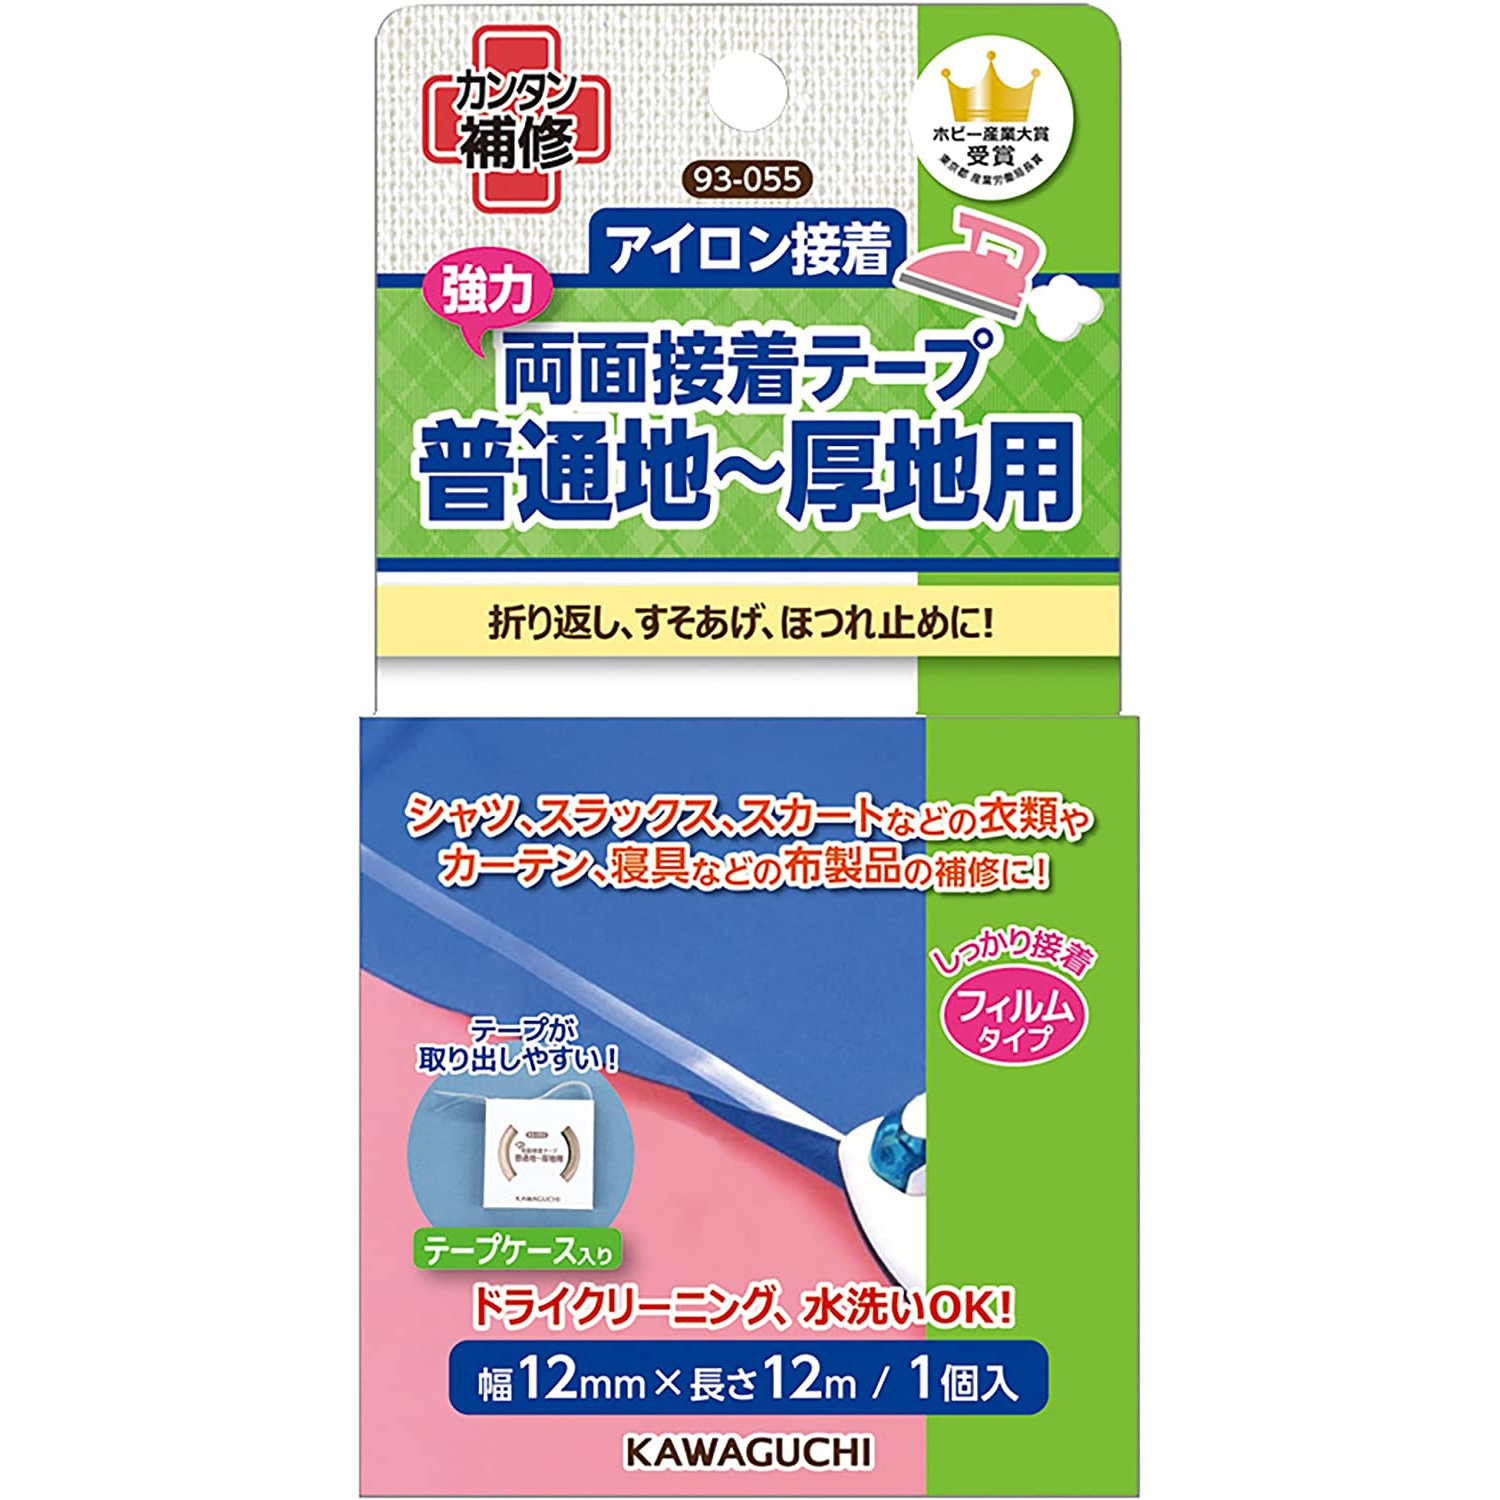 TK93055 KAWAGUCHI Iron-on Mending Fabric with double-sided adhesive, for regular to thick fabric 12mm×12m (sheet)